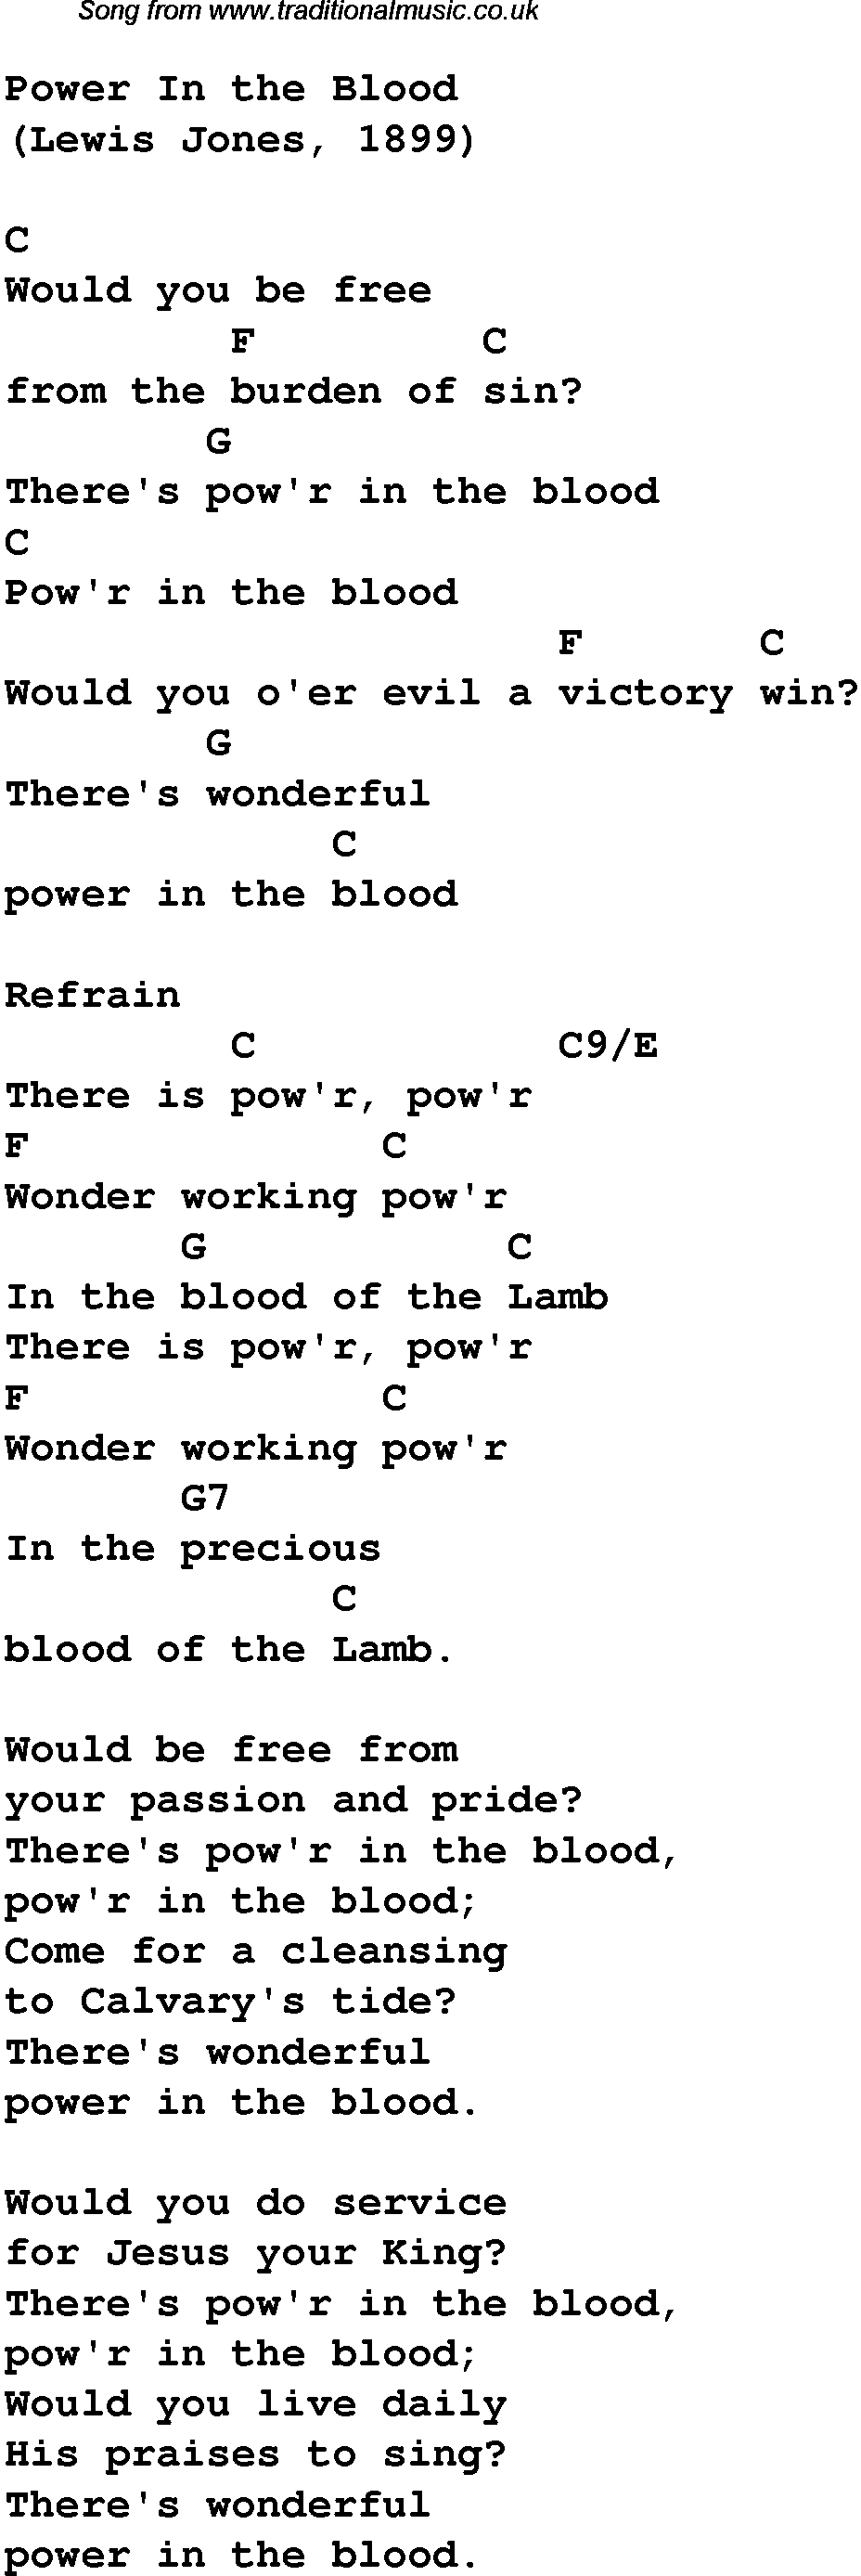 Gospel Song: power-in-the-blood, lyrics and chords.